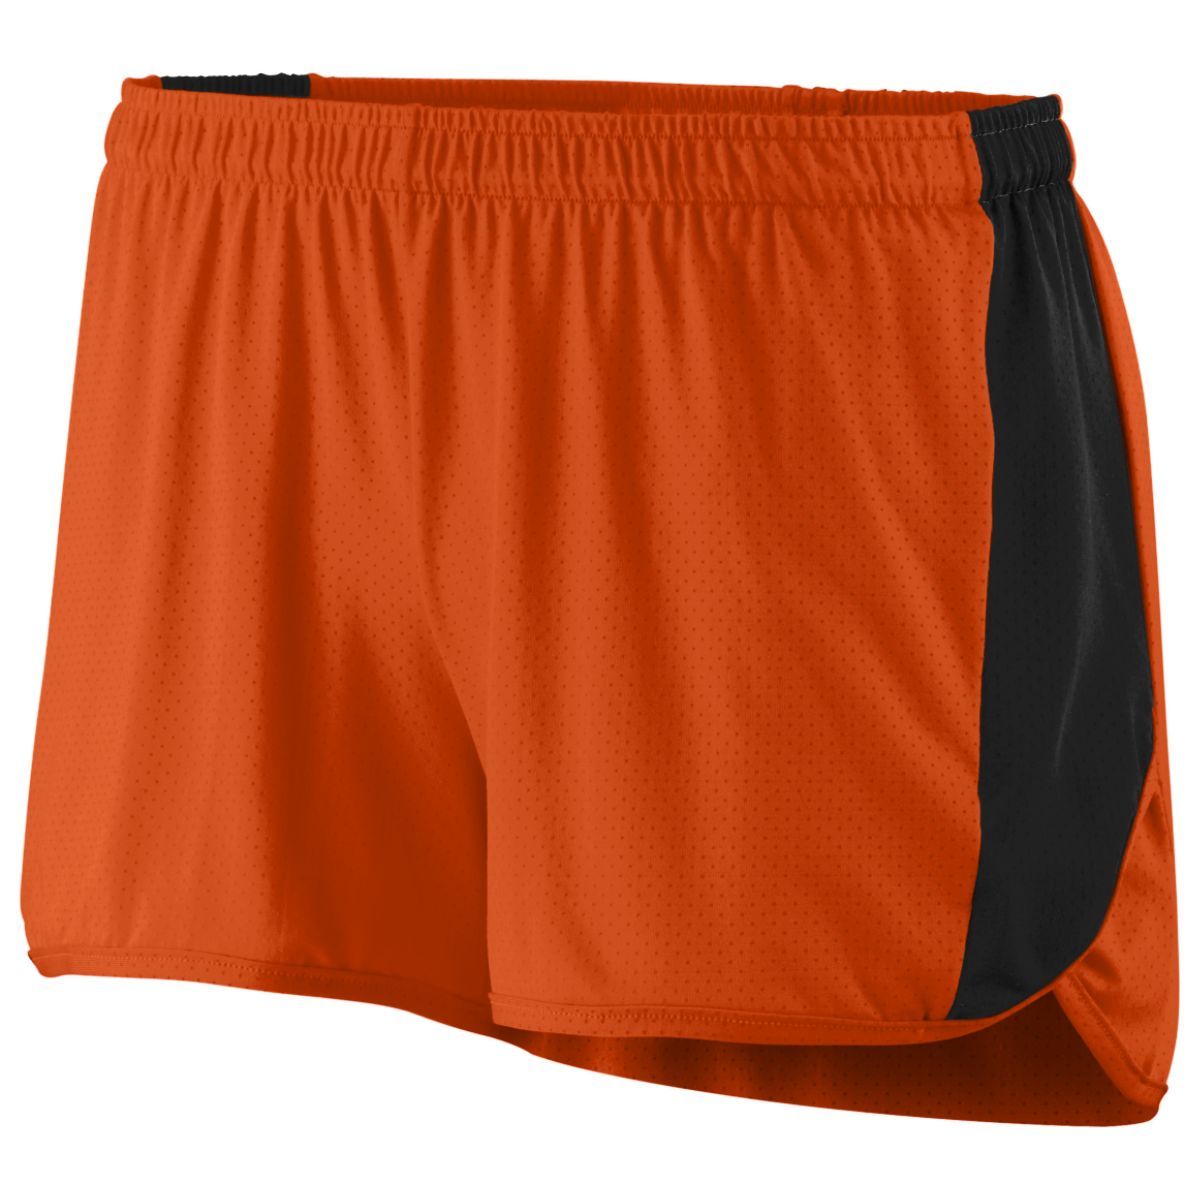 Augusta Sportswear Ladies Sprint Shorts in Orange/Black  -Part of the Ladies, Ladies-Shorts, Augusta-Products, Track-Field product lines at KanaleyCreations.com